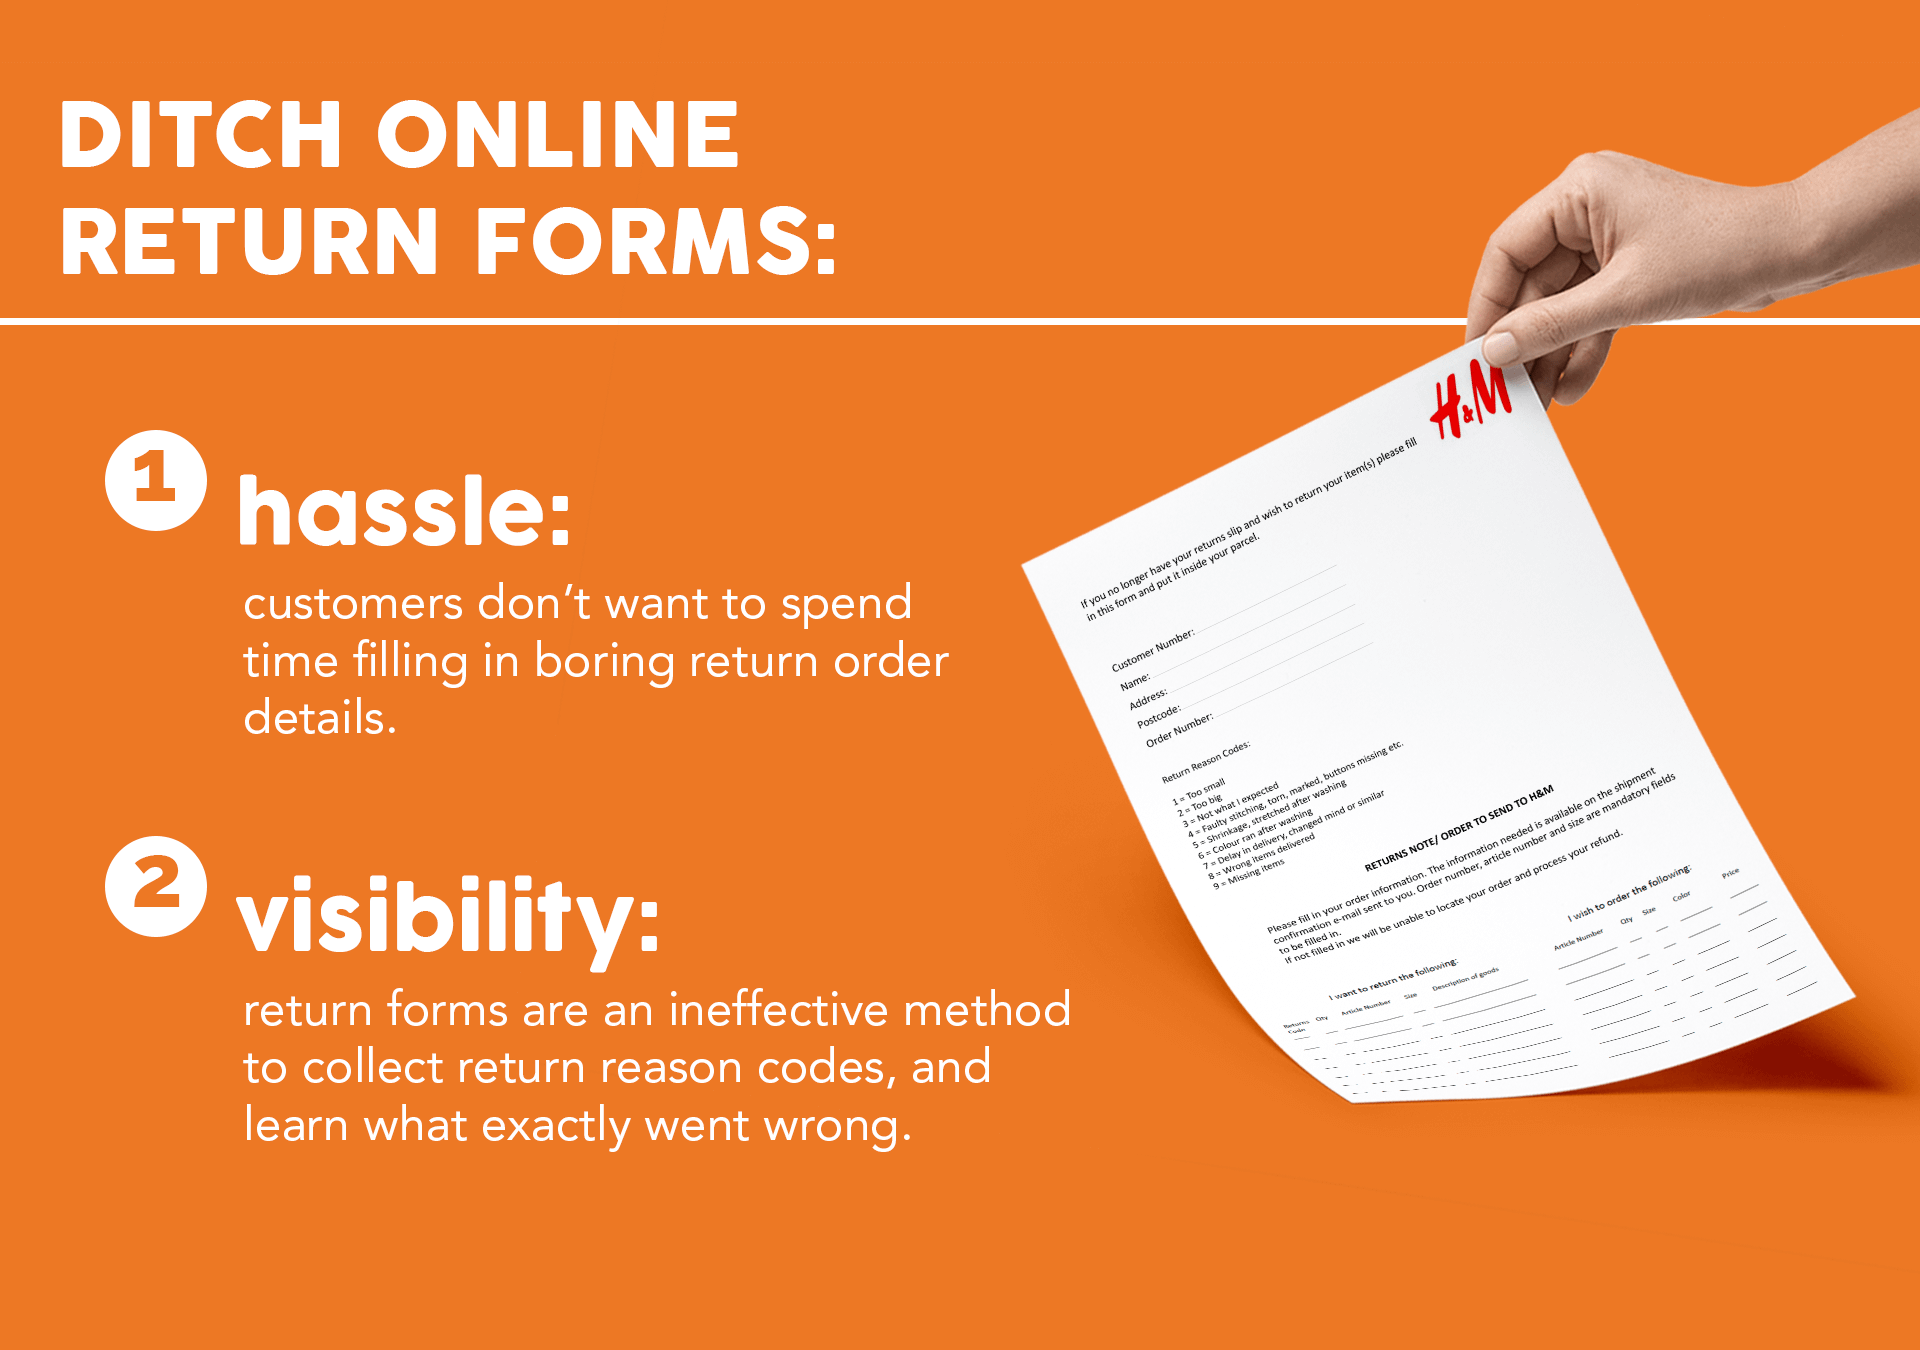 Why Returns Forms Don't Work.png